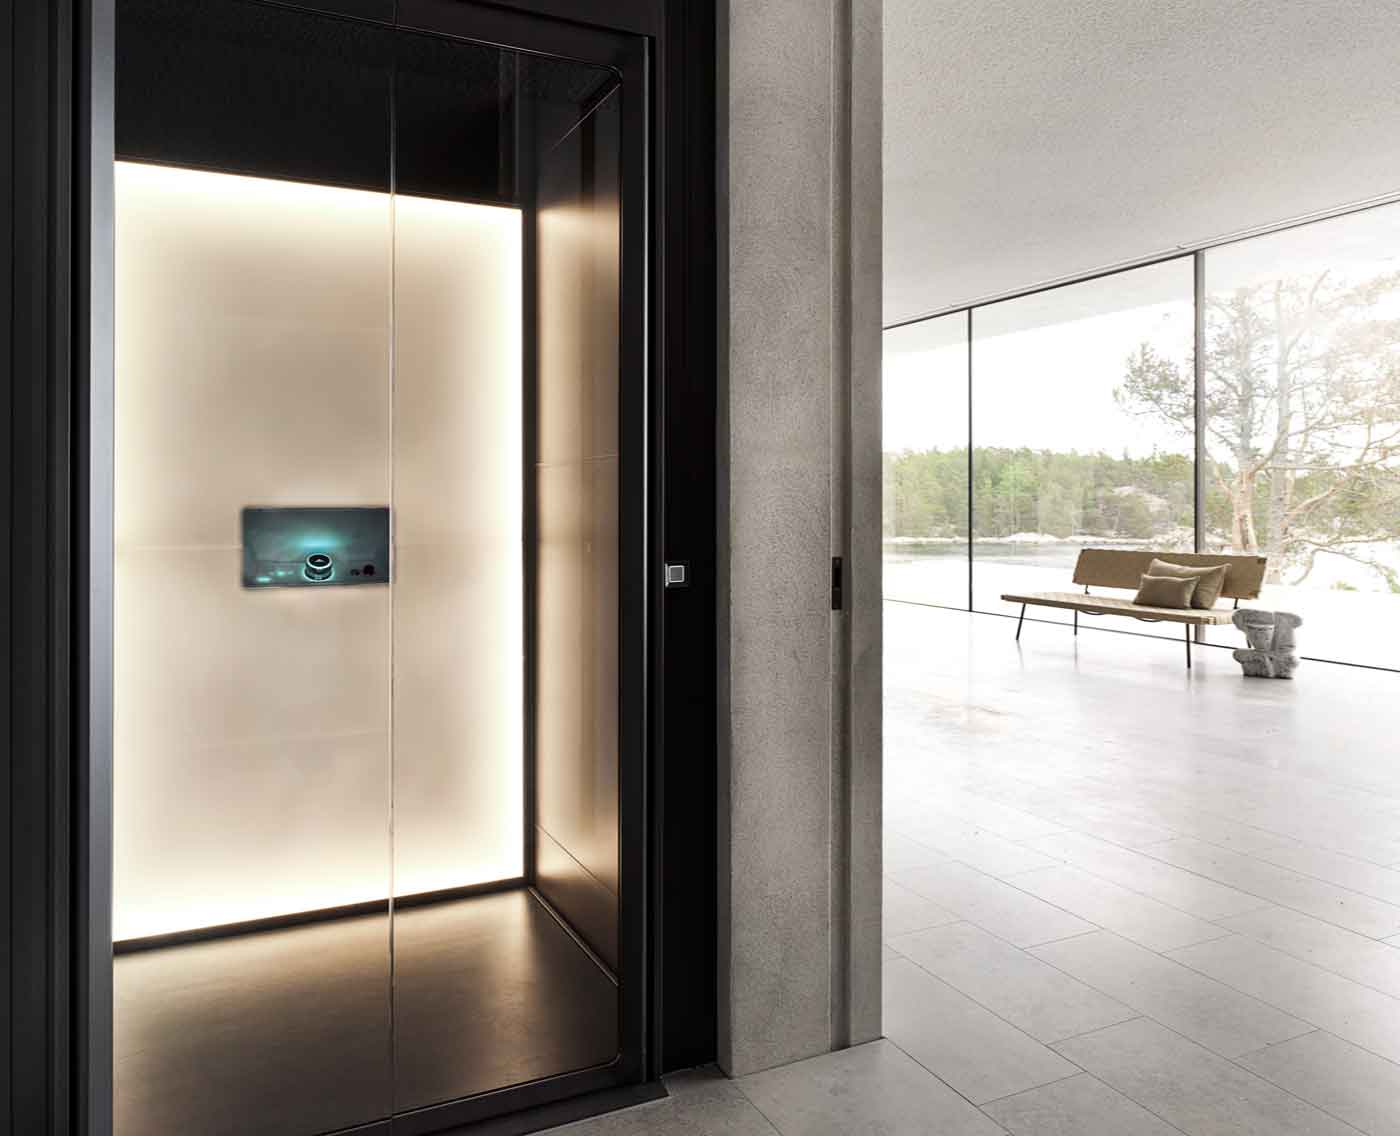 Glamor moderately Passive Award-winning elevators for home & commercial use | Aritco